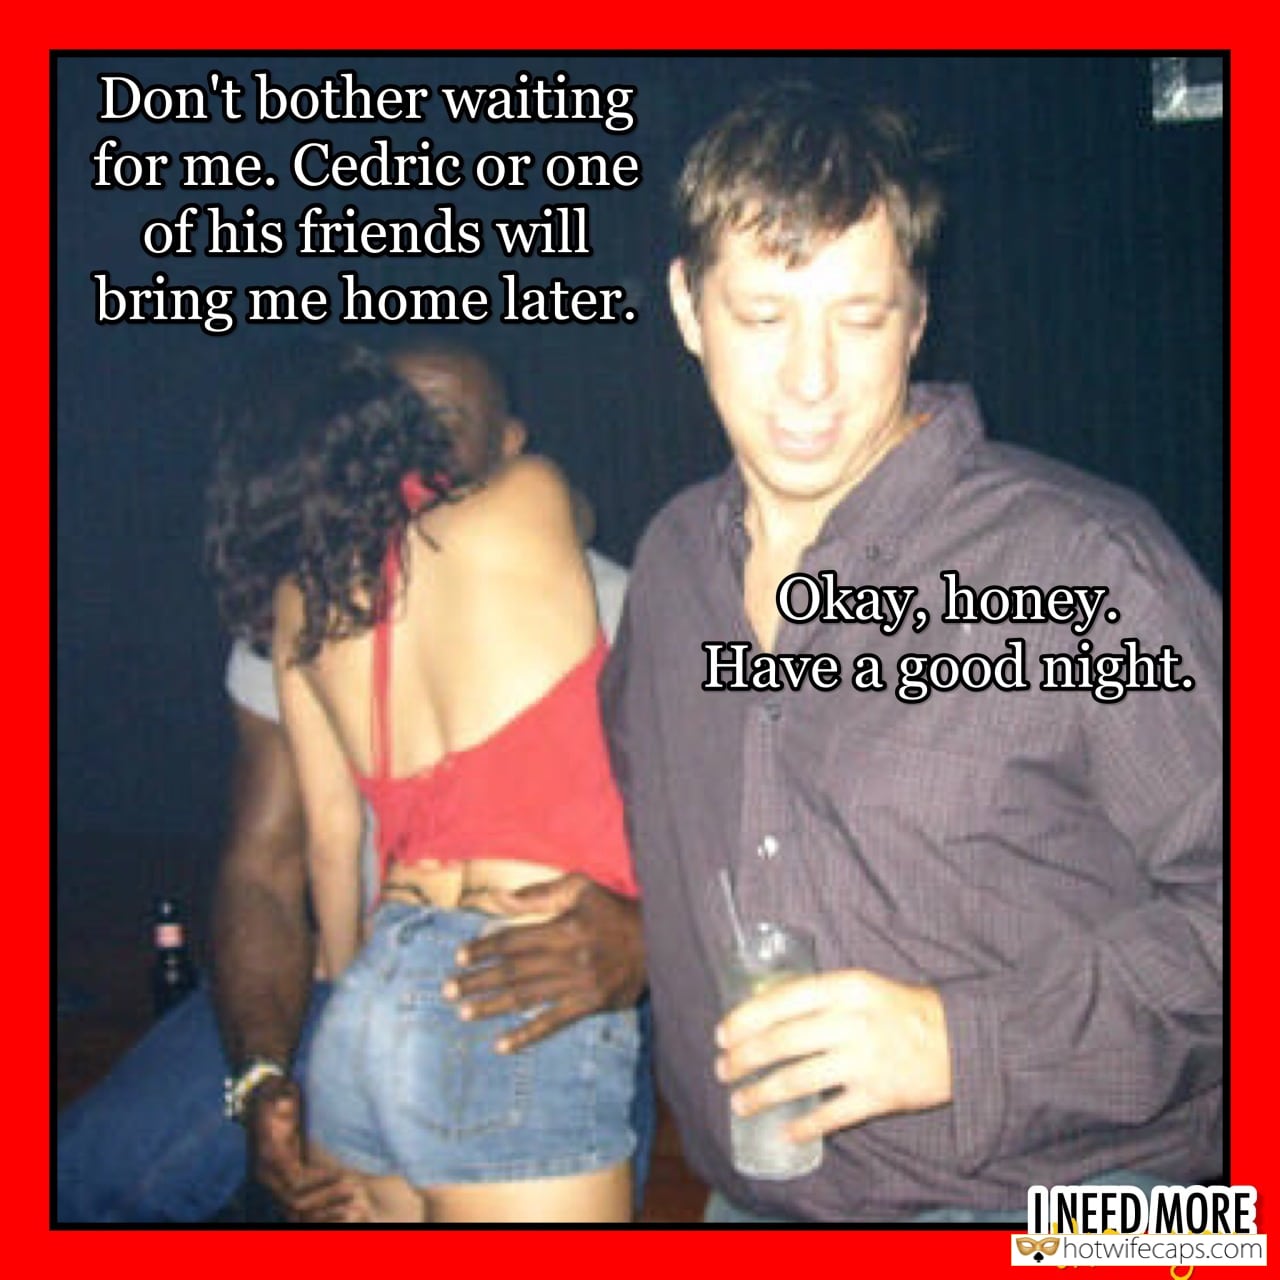 My Favorite hotwife caption: Don’t bother waiting for me. Cedric or one of his friends will bring me home later. Okay, honey. Have a good night. ONEED MORE trian you cheating hot wife gif Husband Leaves Her Wife to Get Fucked